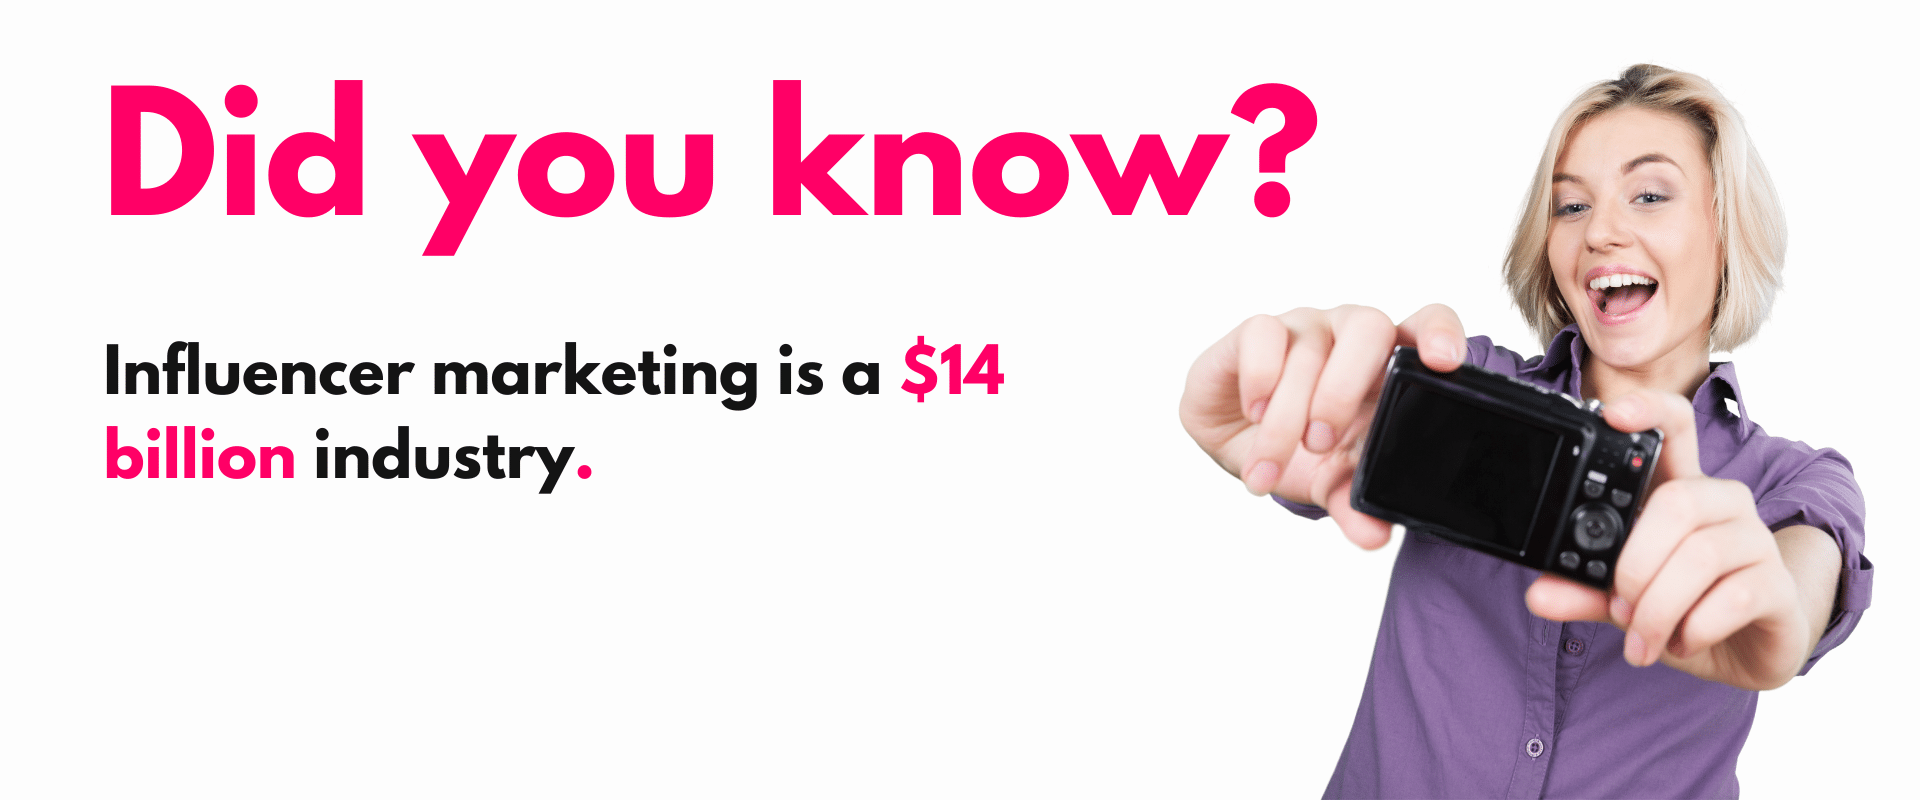 Did you know? influence marketing is a $44 billion industry.